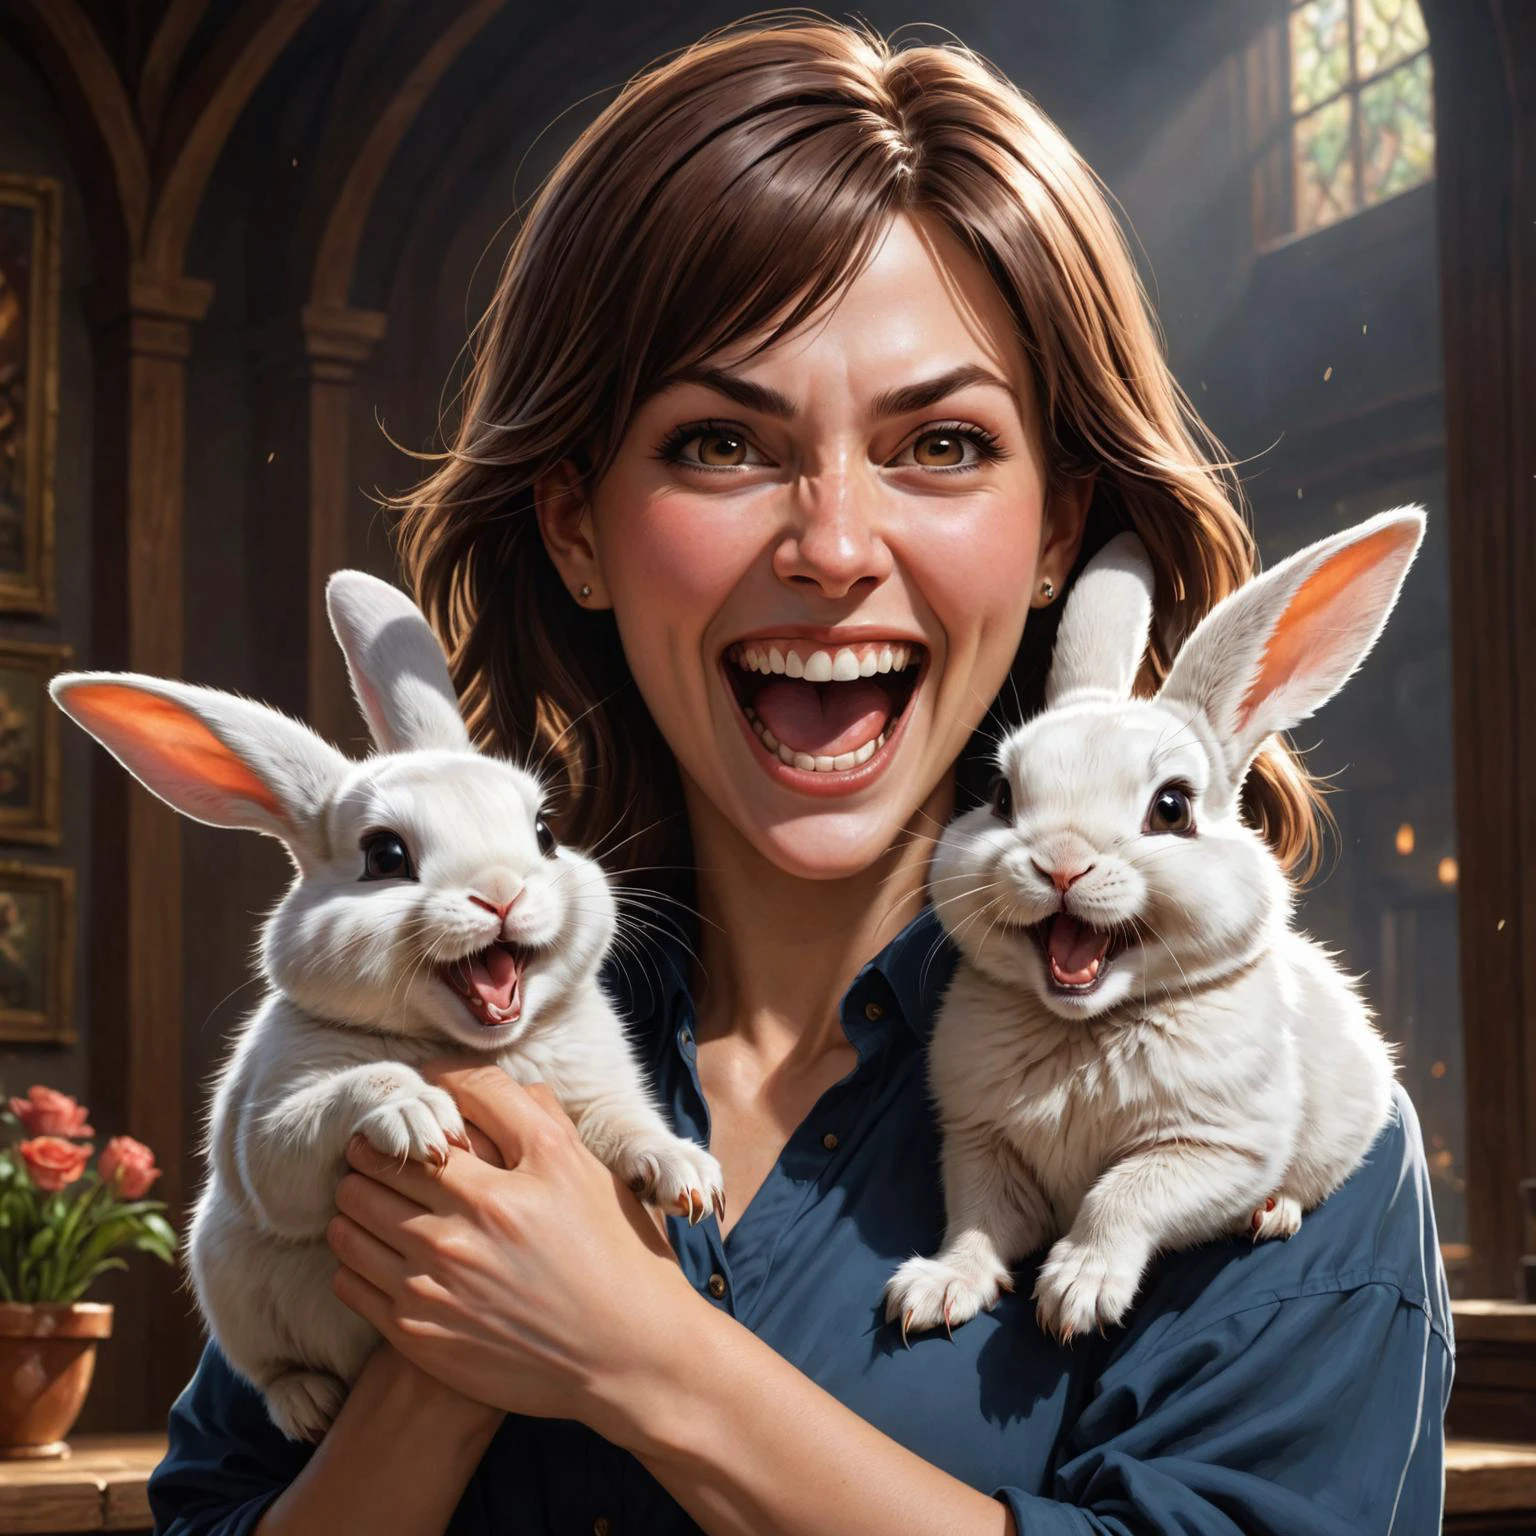 photorealistic painting  by (((Lois van Baarle) and Ted Nasmith) and Charlie Bowater) and Chris Leib, cute Belgian woman dual wielding holding two bunnies, evil maniacal laughter dof, 